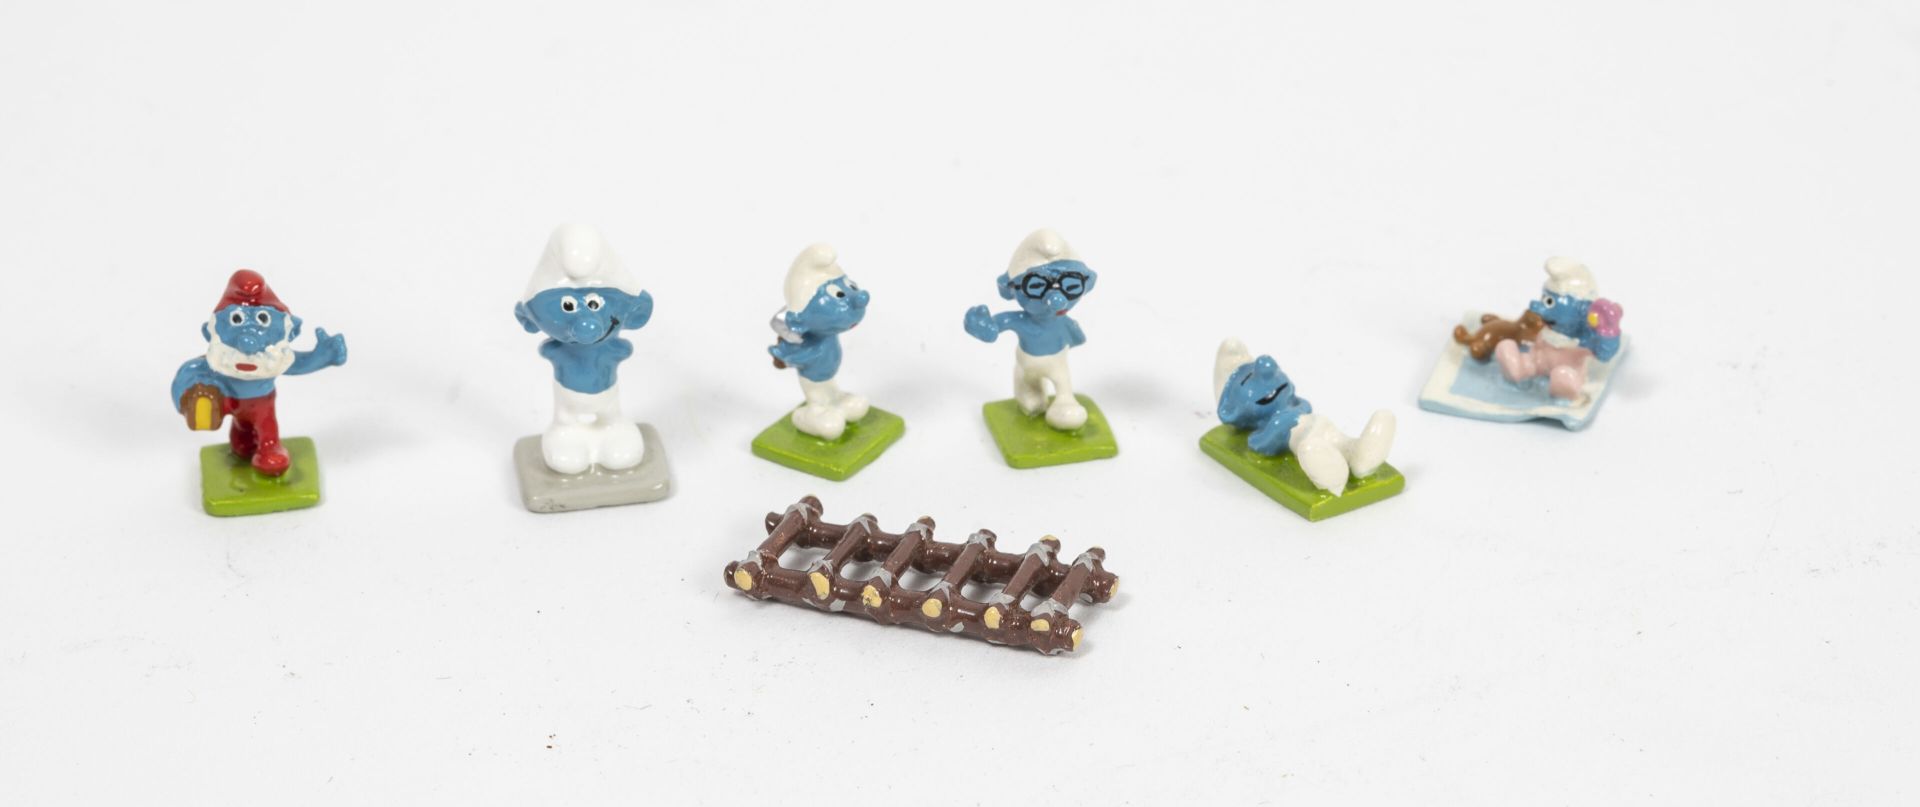 PEYO PIXI, Paris.

Smurfs Maxi Mini collection.

Smurf (hands in the back), 1995&hellip;